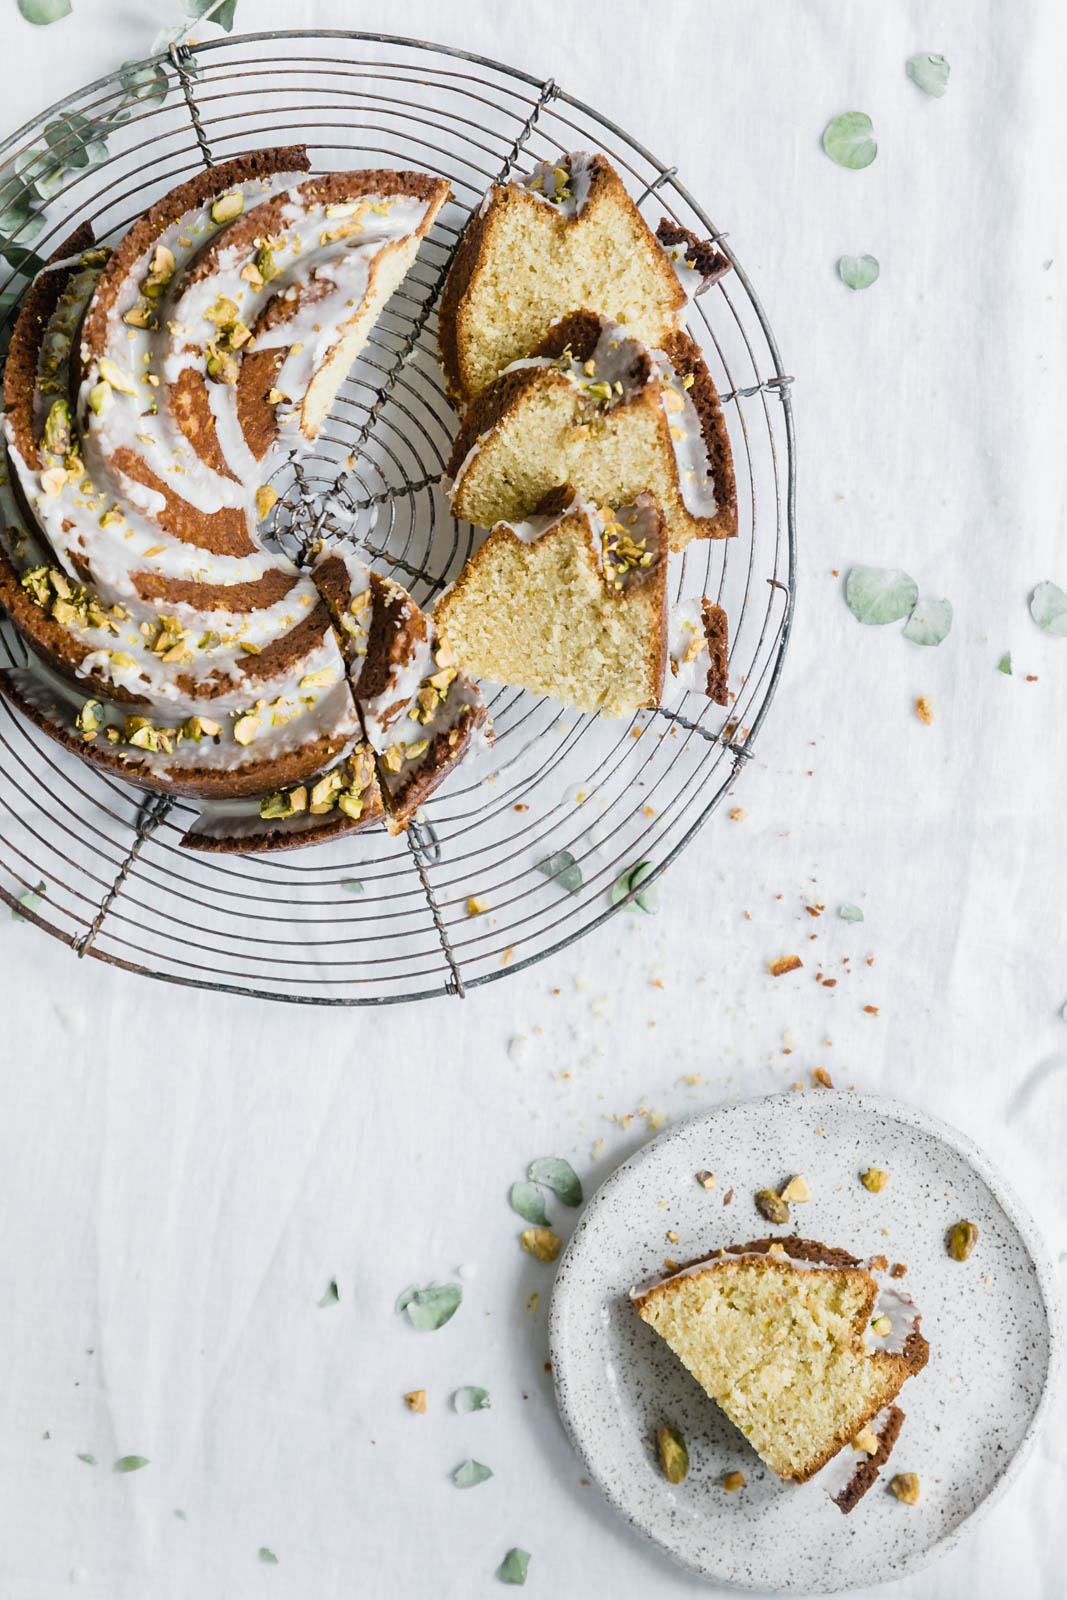 sliced pistachio olive oil cake on a wire rack